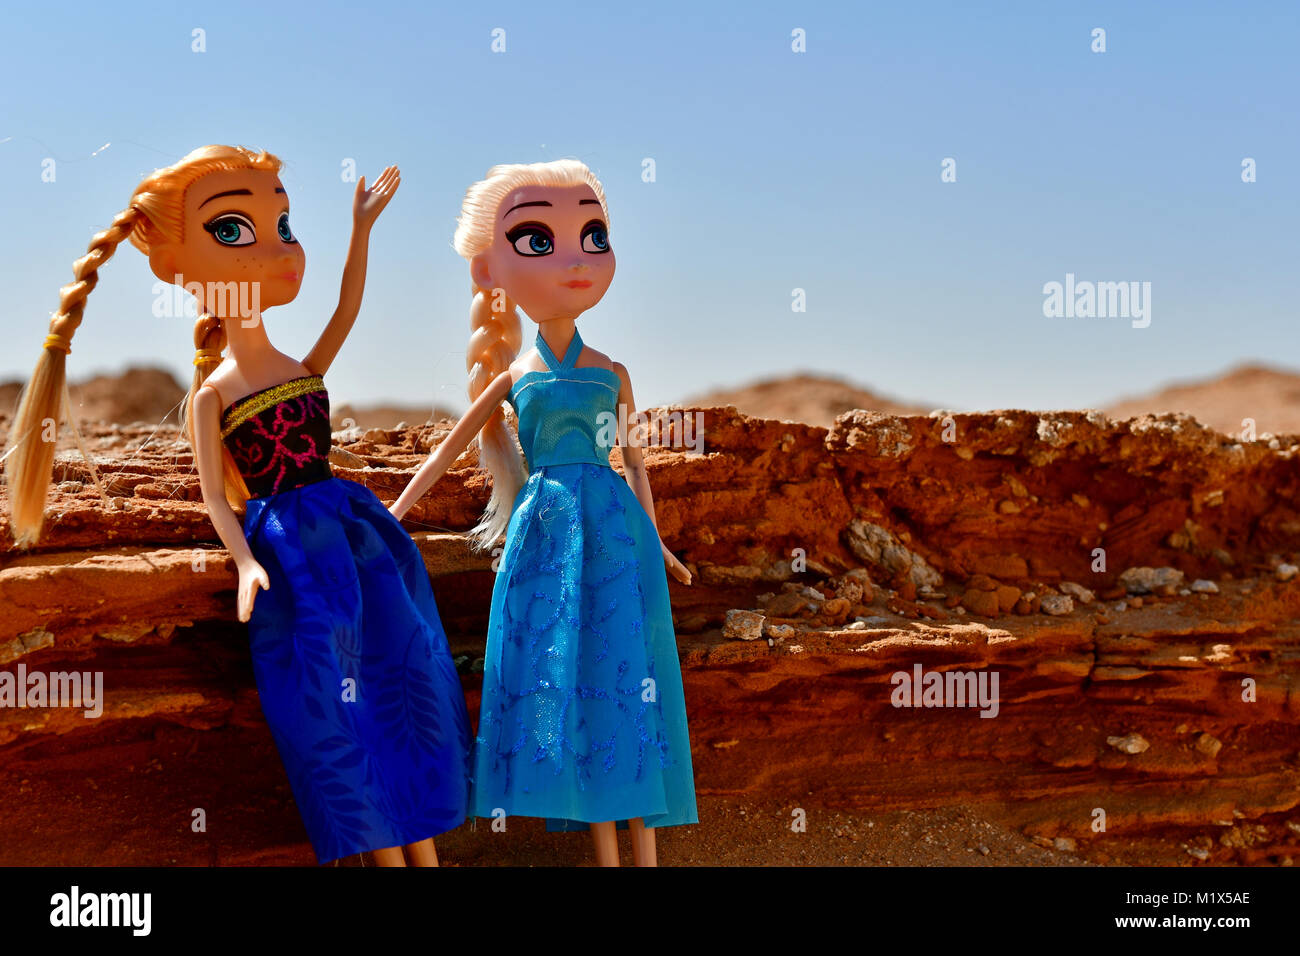 Barbie girls dressed in red and blue are posing for modeling photos in the desert rocks on location Stock Photo